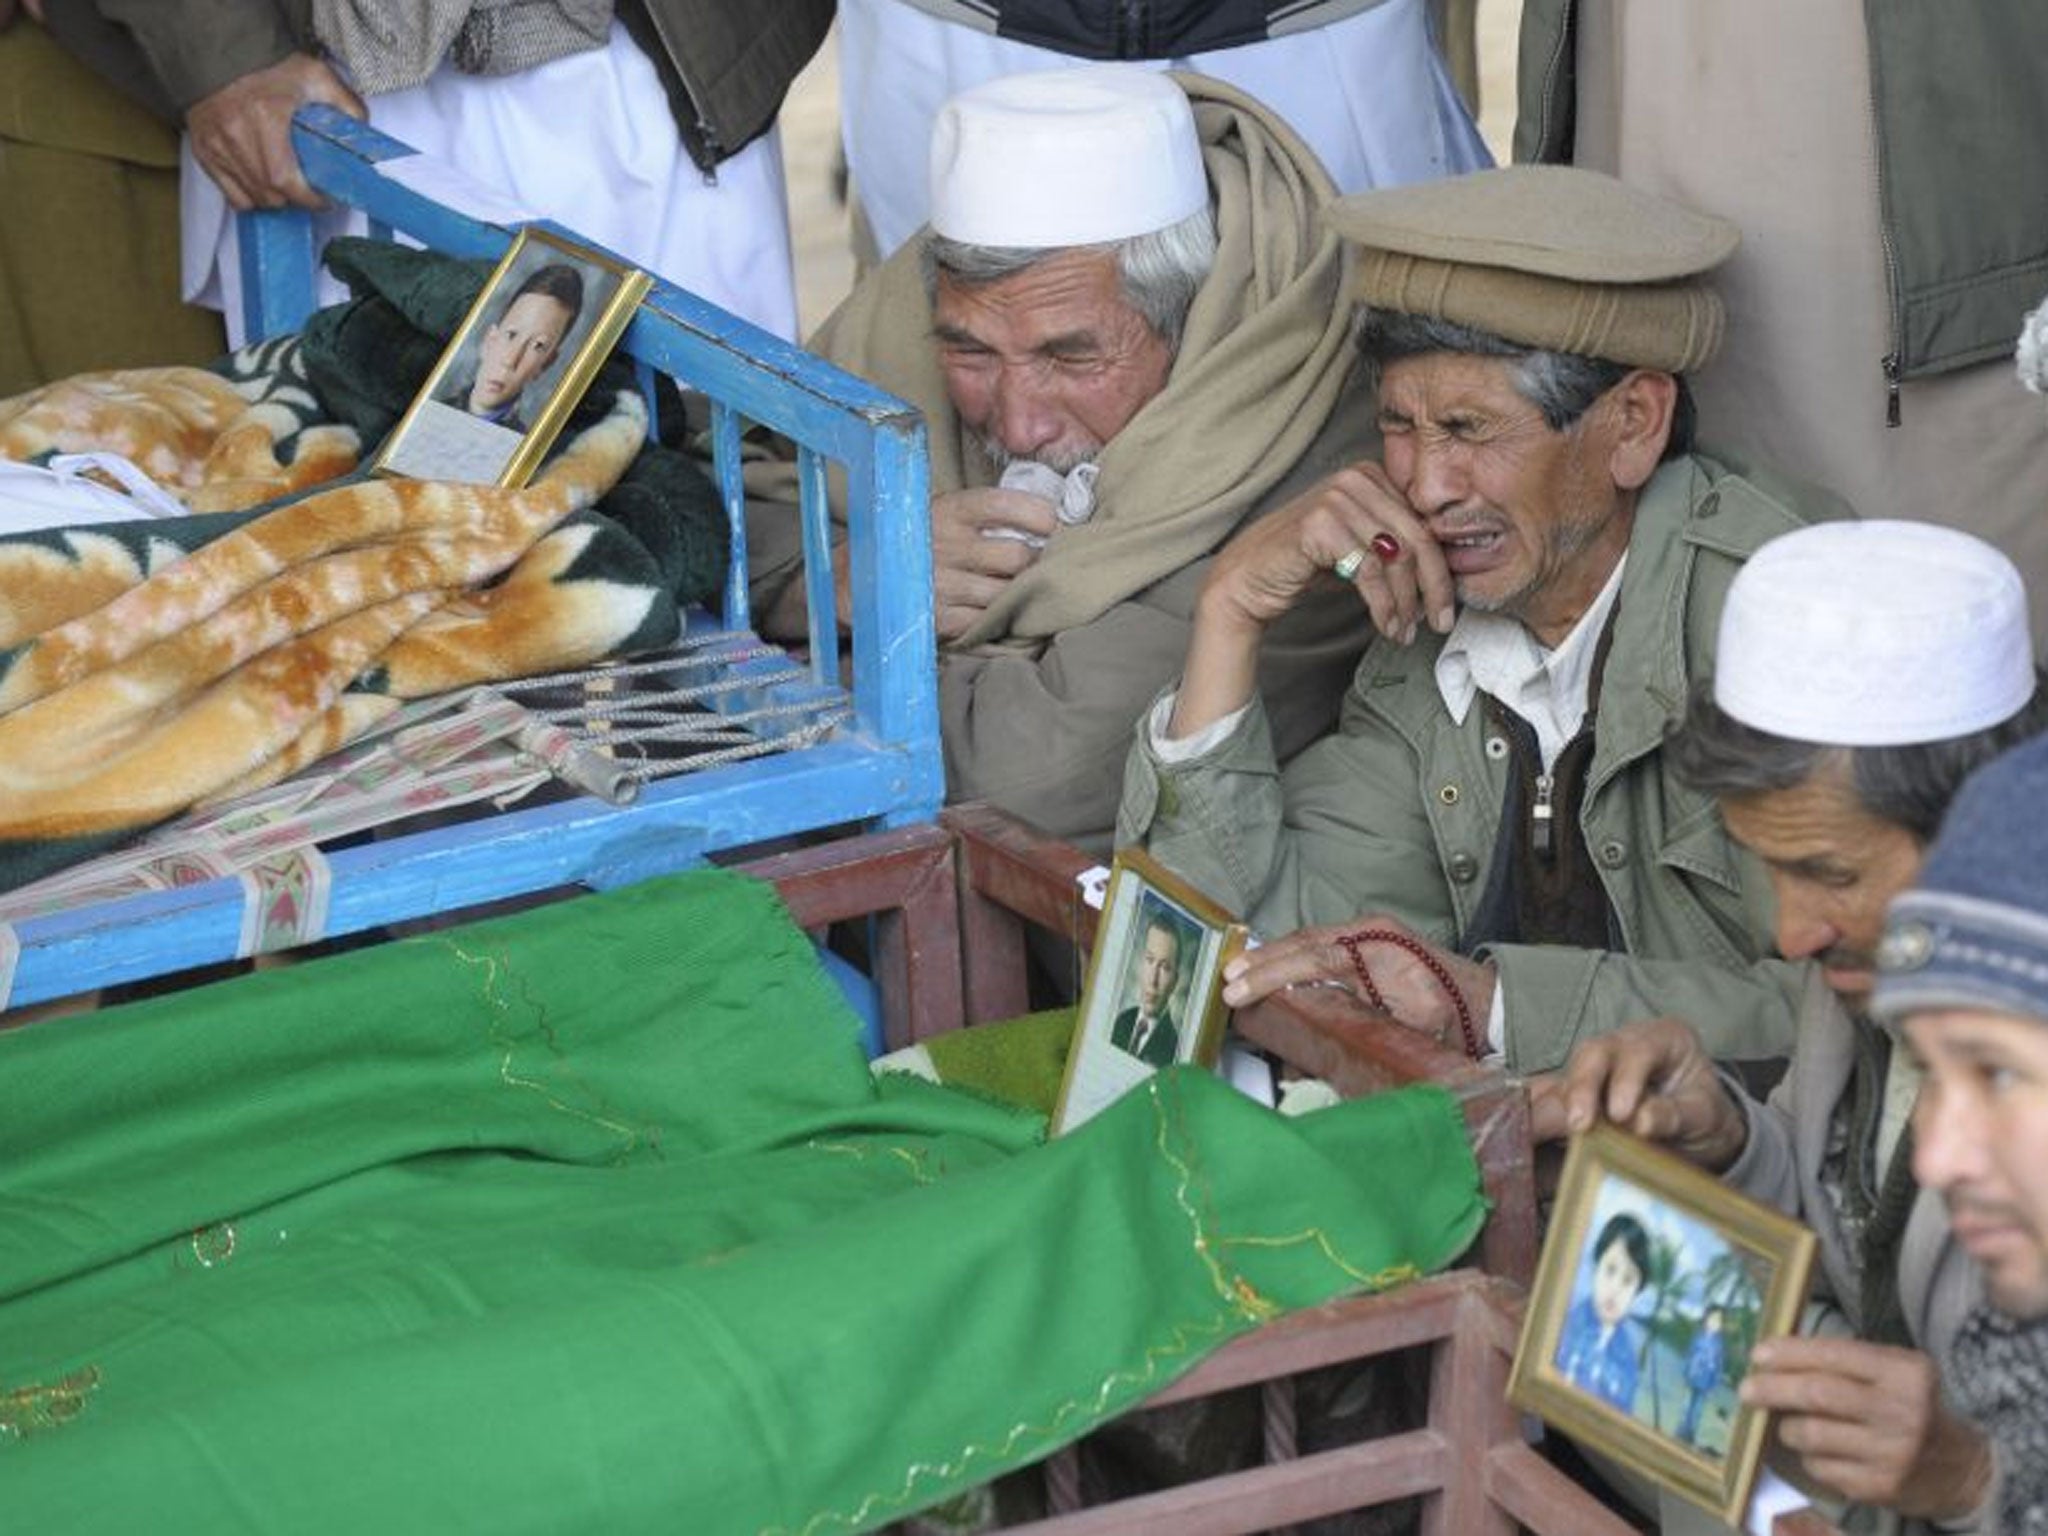 Shia men weep as the bodies of adults and children killed in Saturday’s bomb attack in Quetta are prepared for burial in a mass grave yesterday, as the death toll rose to 84